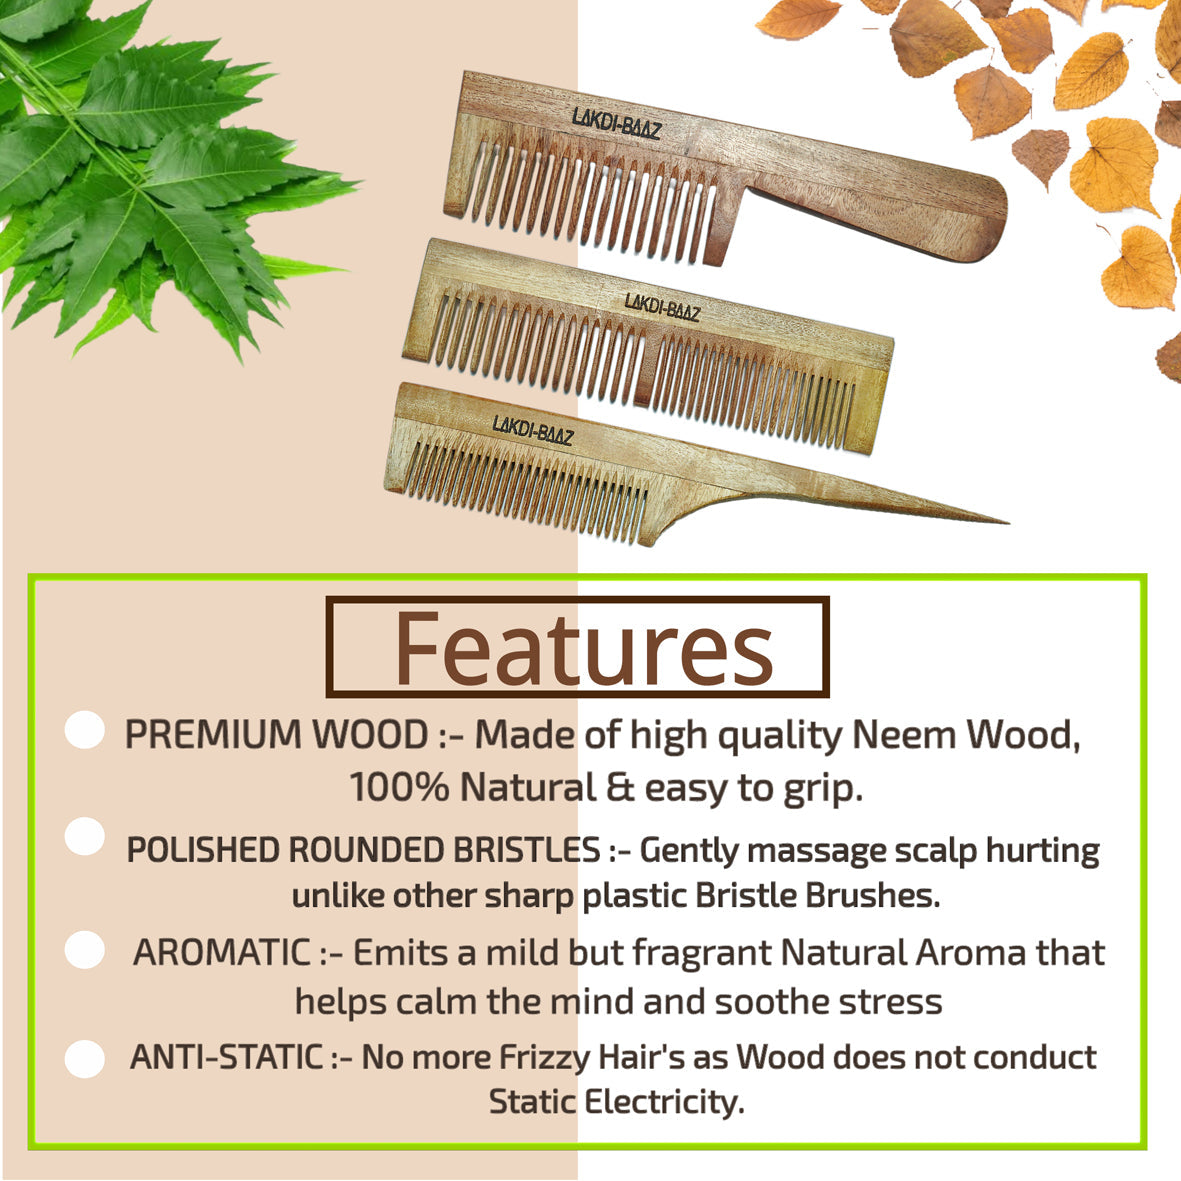 Buy LakdiBaaz Neem Wood Comb Tail Comb Wide & Narrow Comb Handle Wooden Comb for Hair Growth Comb hair Kangha for Men and Women Set of 3